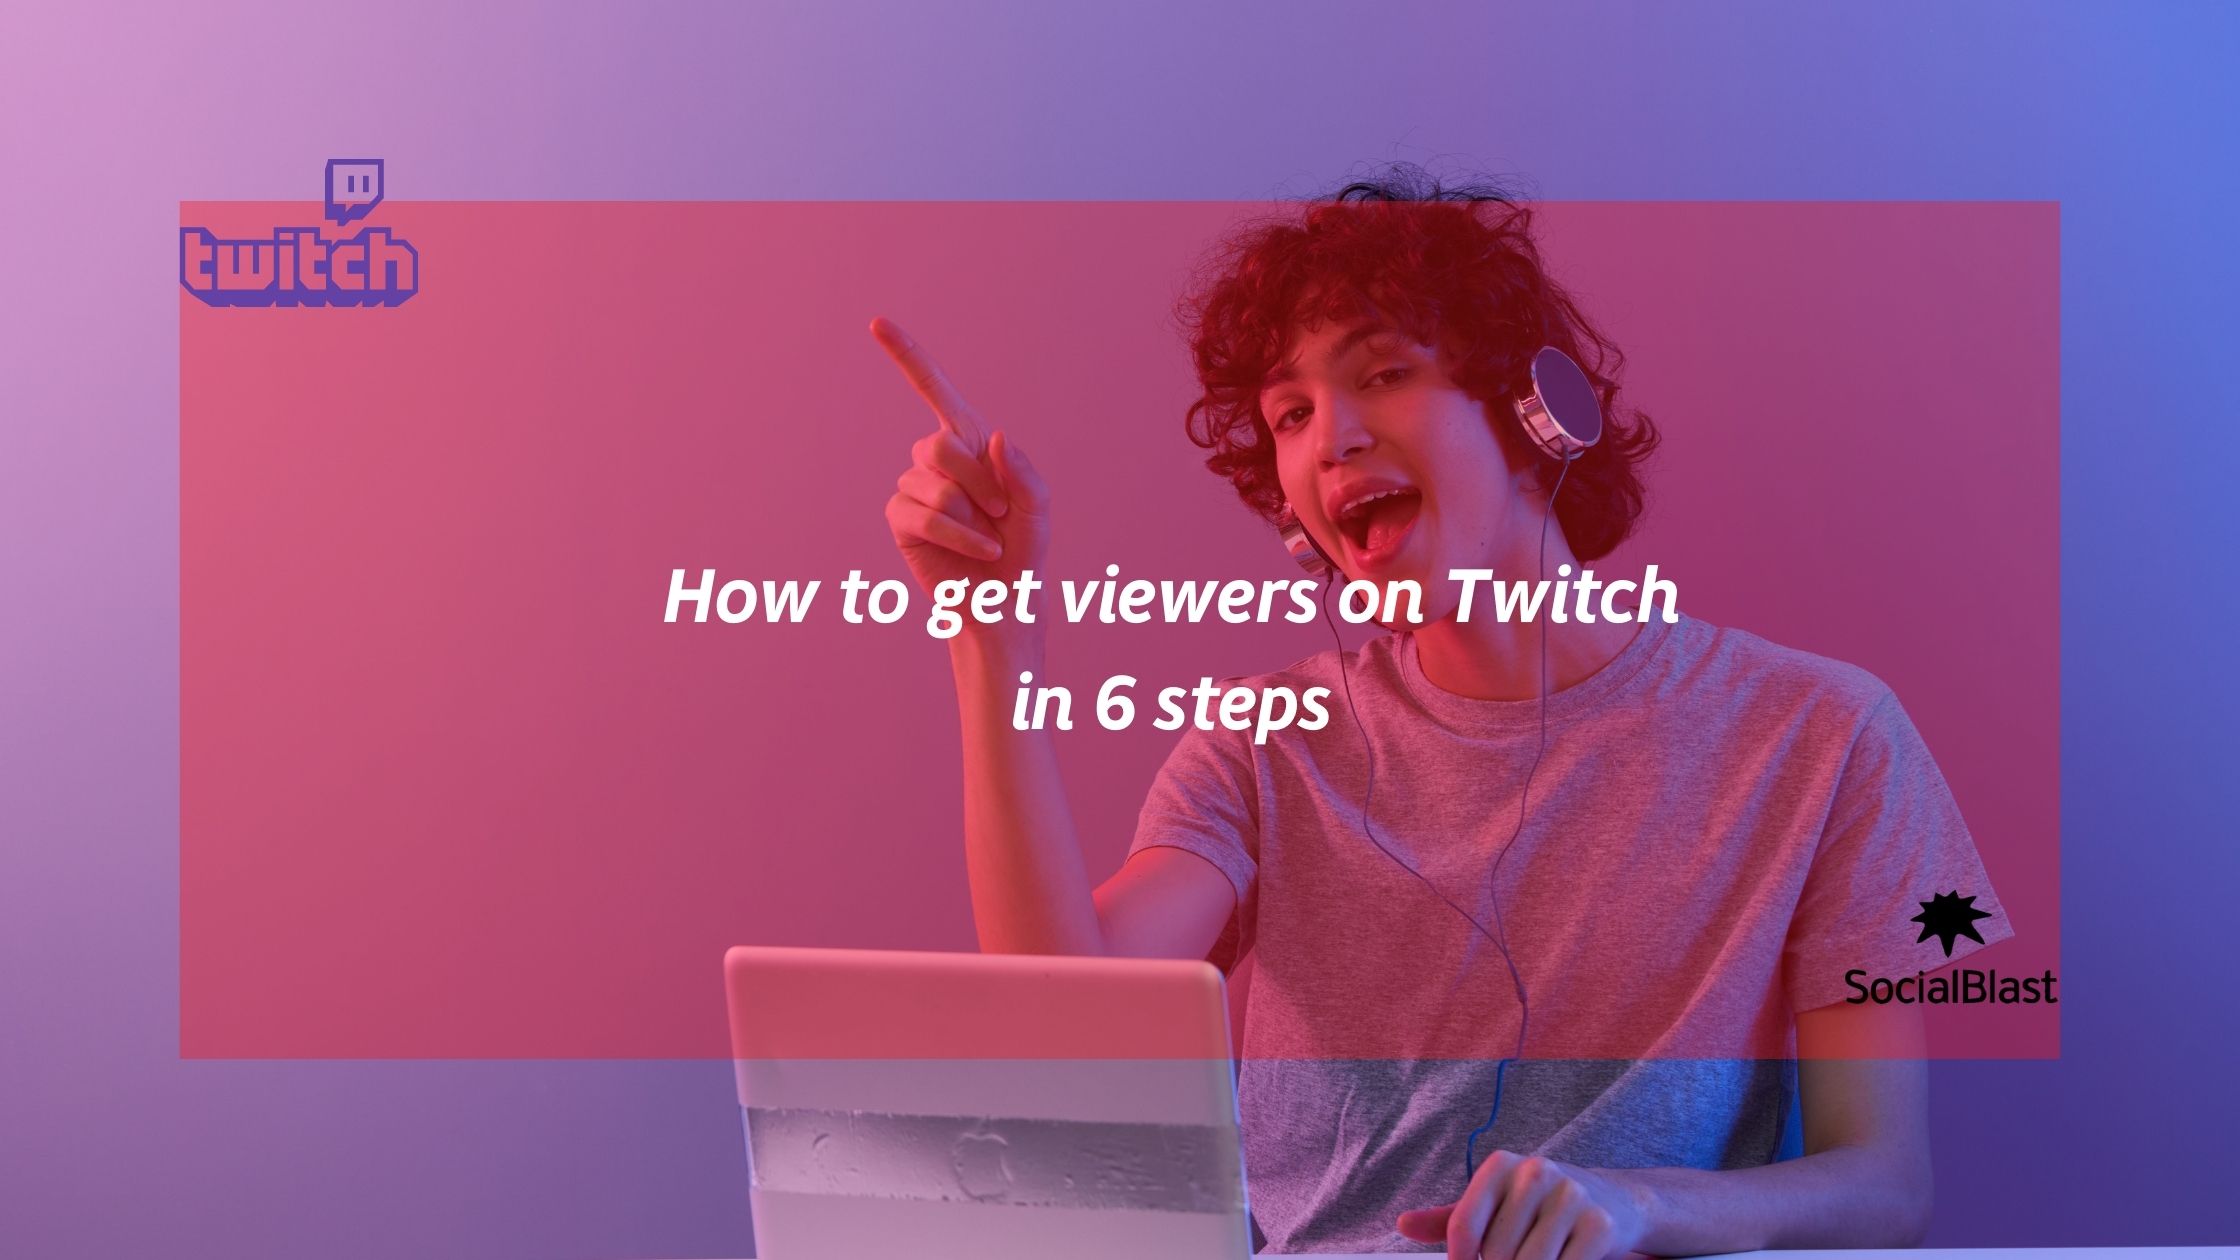 How to get viewers on Twitch in 6 steps